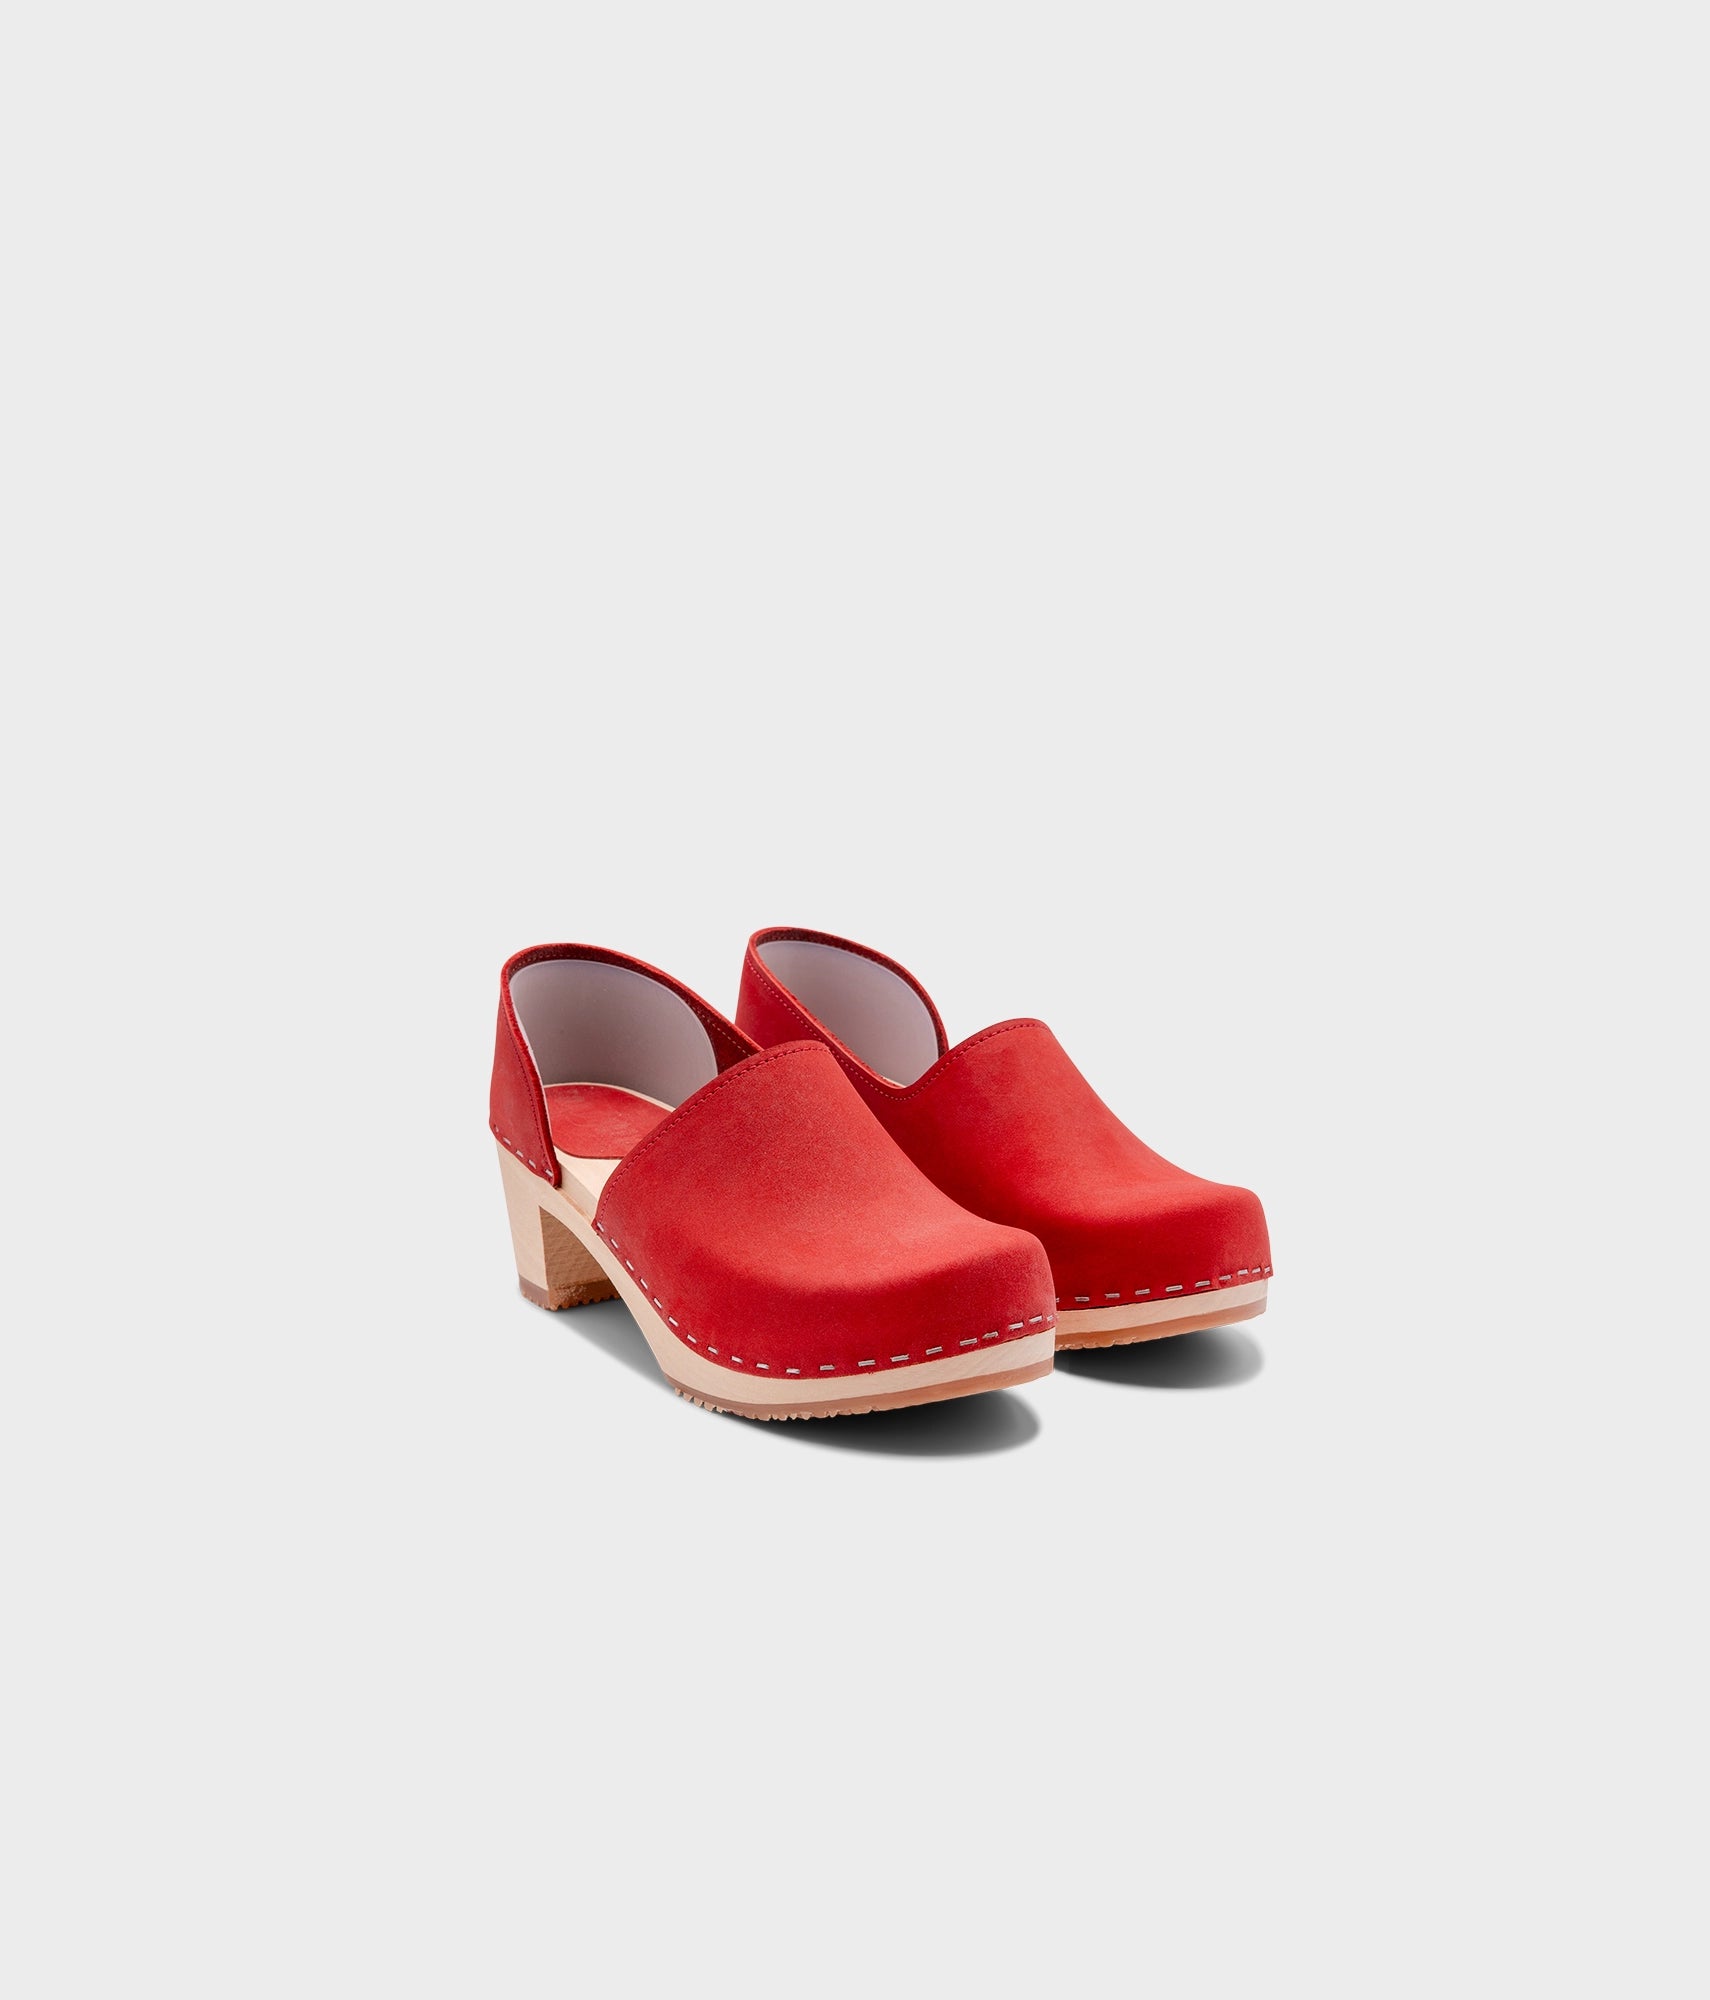 high heeled closed-back clogs in red nubuck leather stapled on a light wooden base